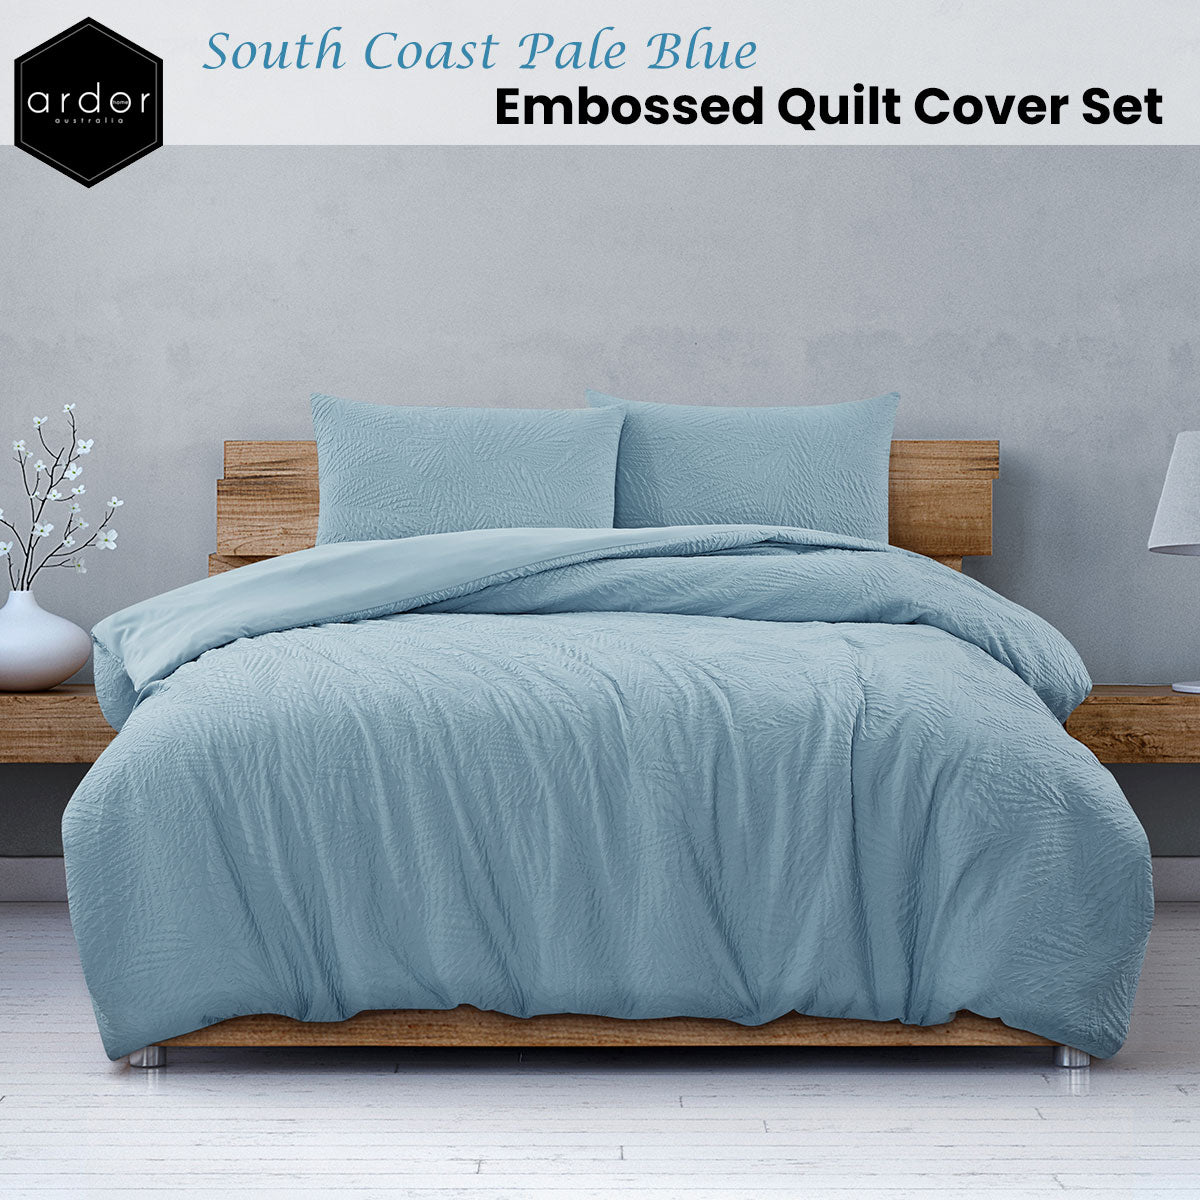 QUEEN Embossed Quilt Cover Set - Pale Blue